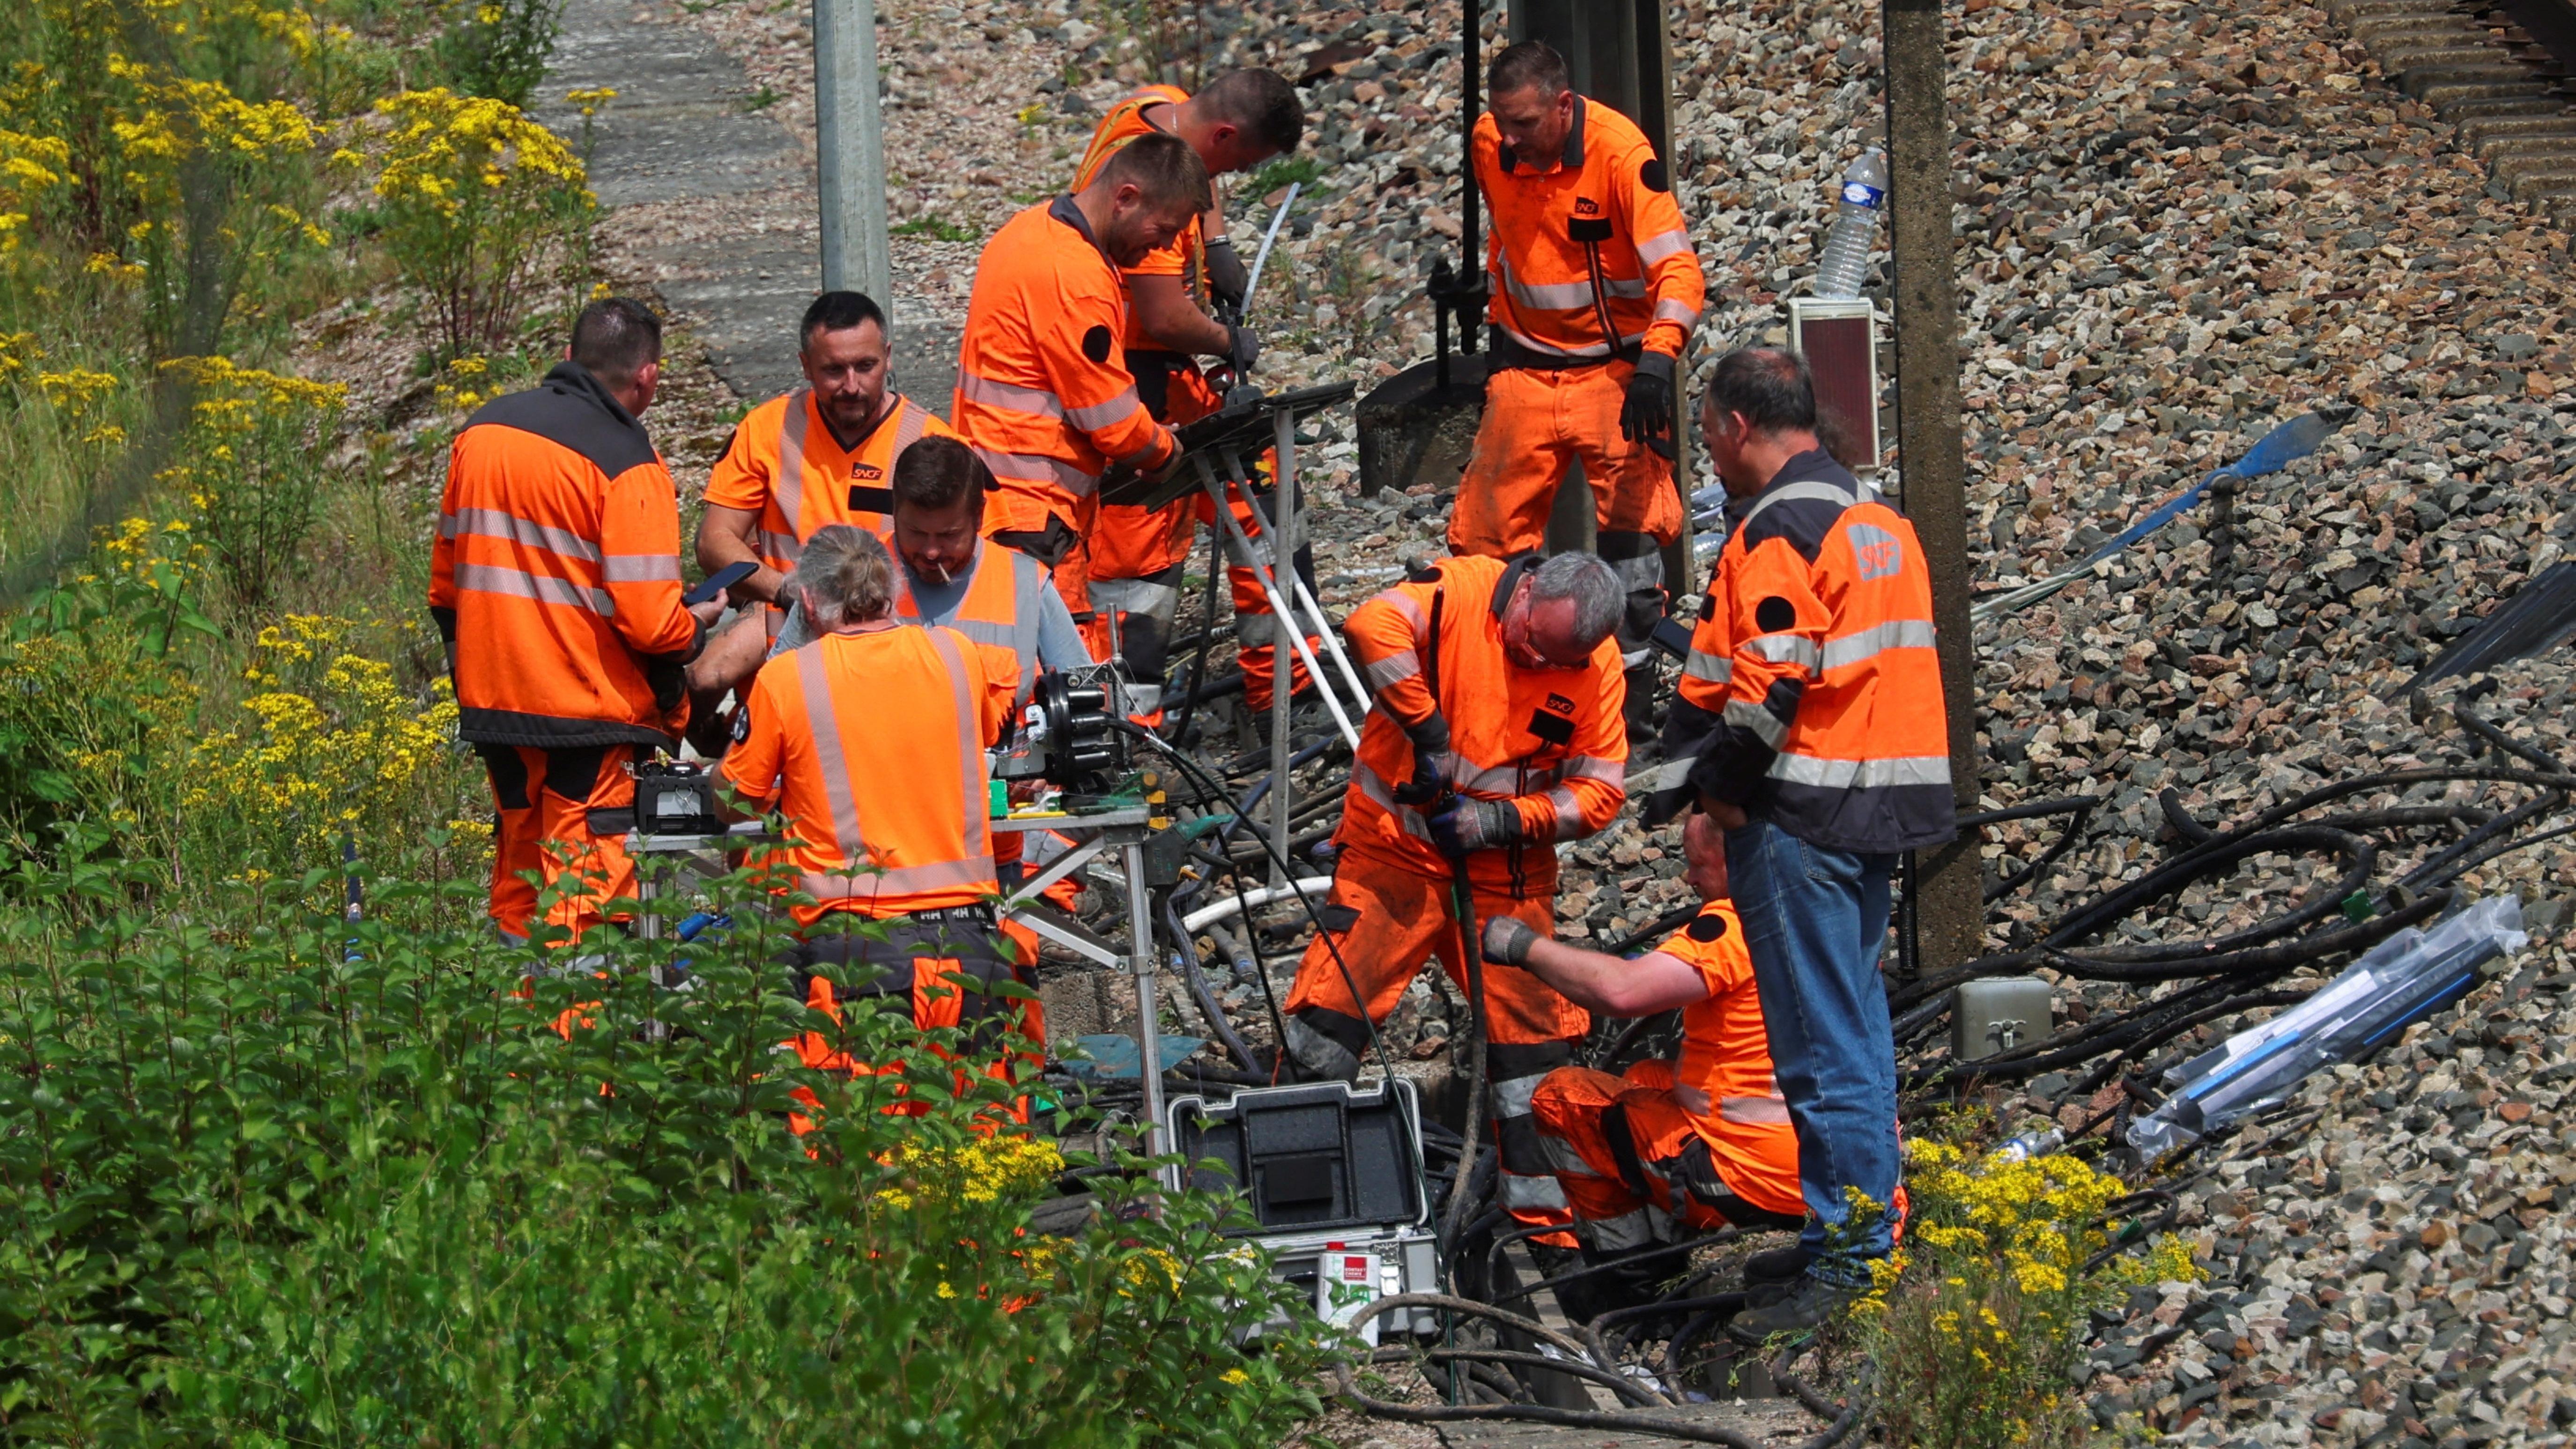 French rail sabotage causes chaos as Paris Olympics open